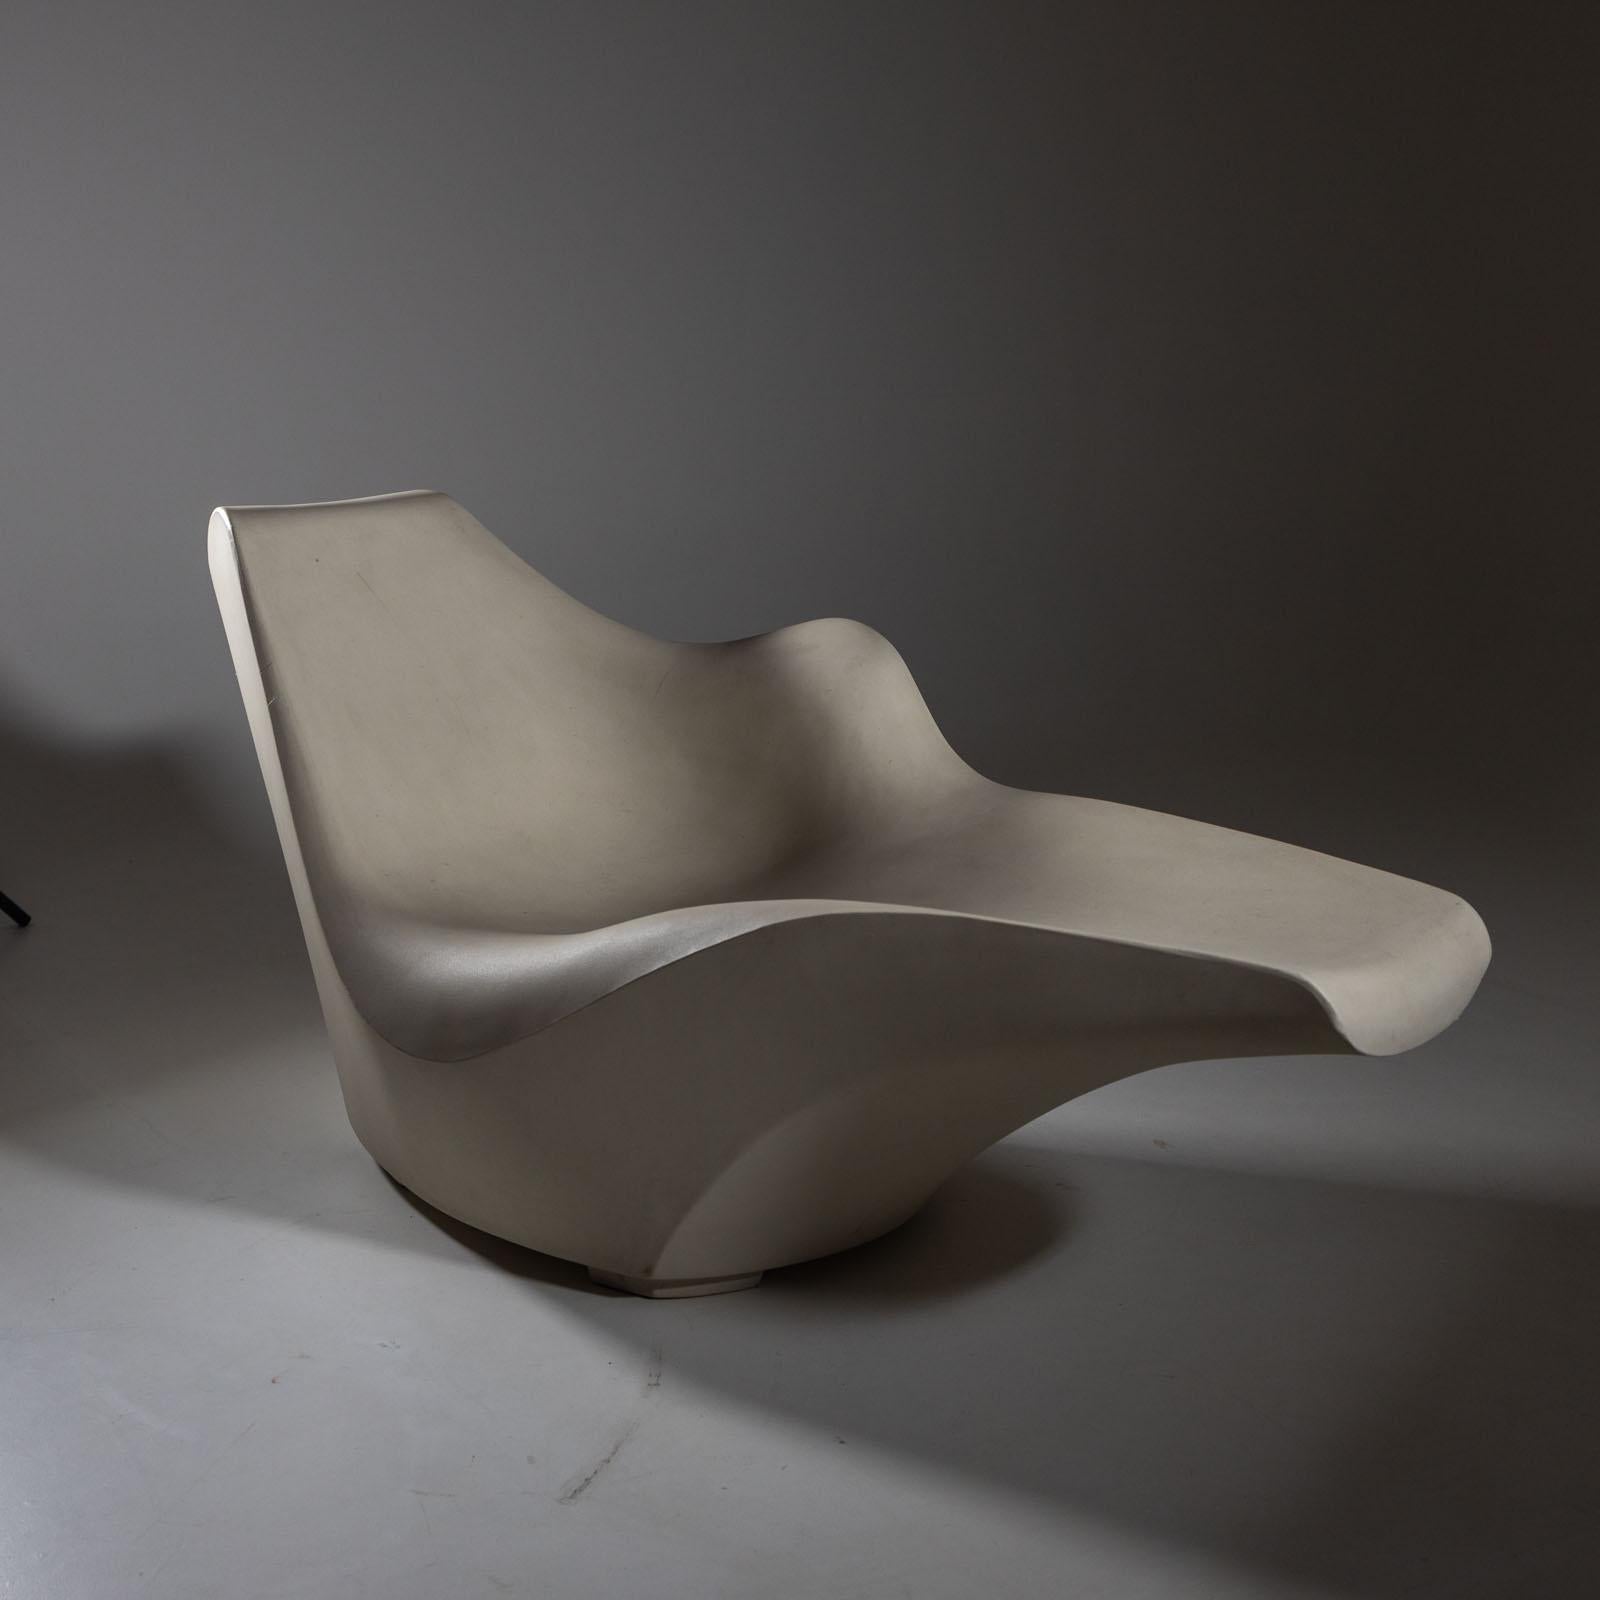 Contemporary Tokyo Pop Chaise Longue by Tokujin Yoshioka for Driade, 2002 For Sale